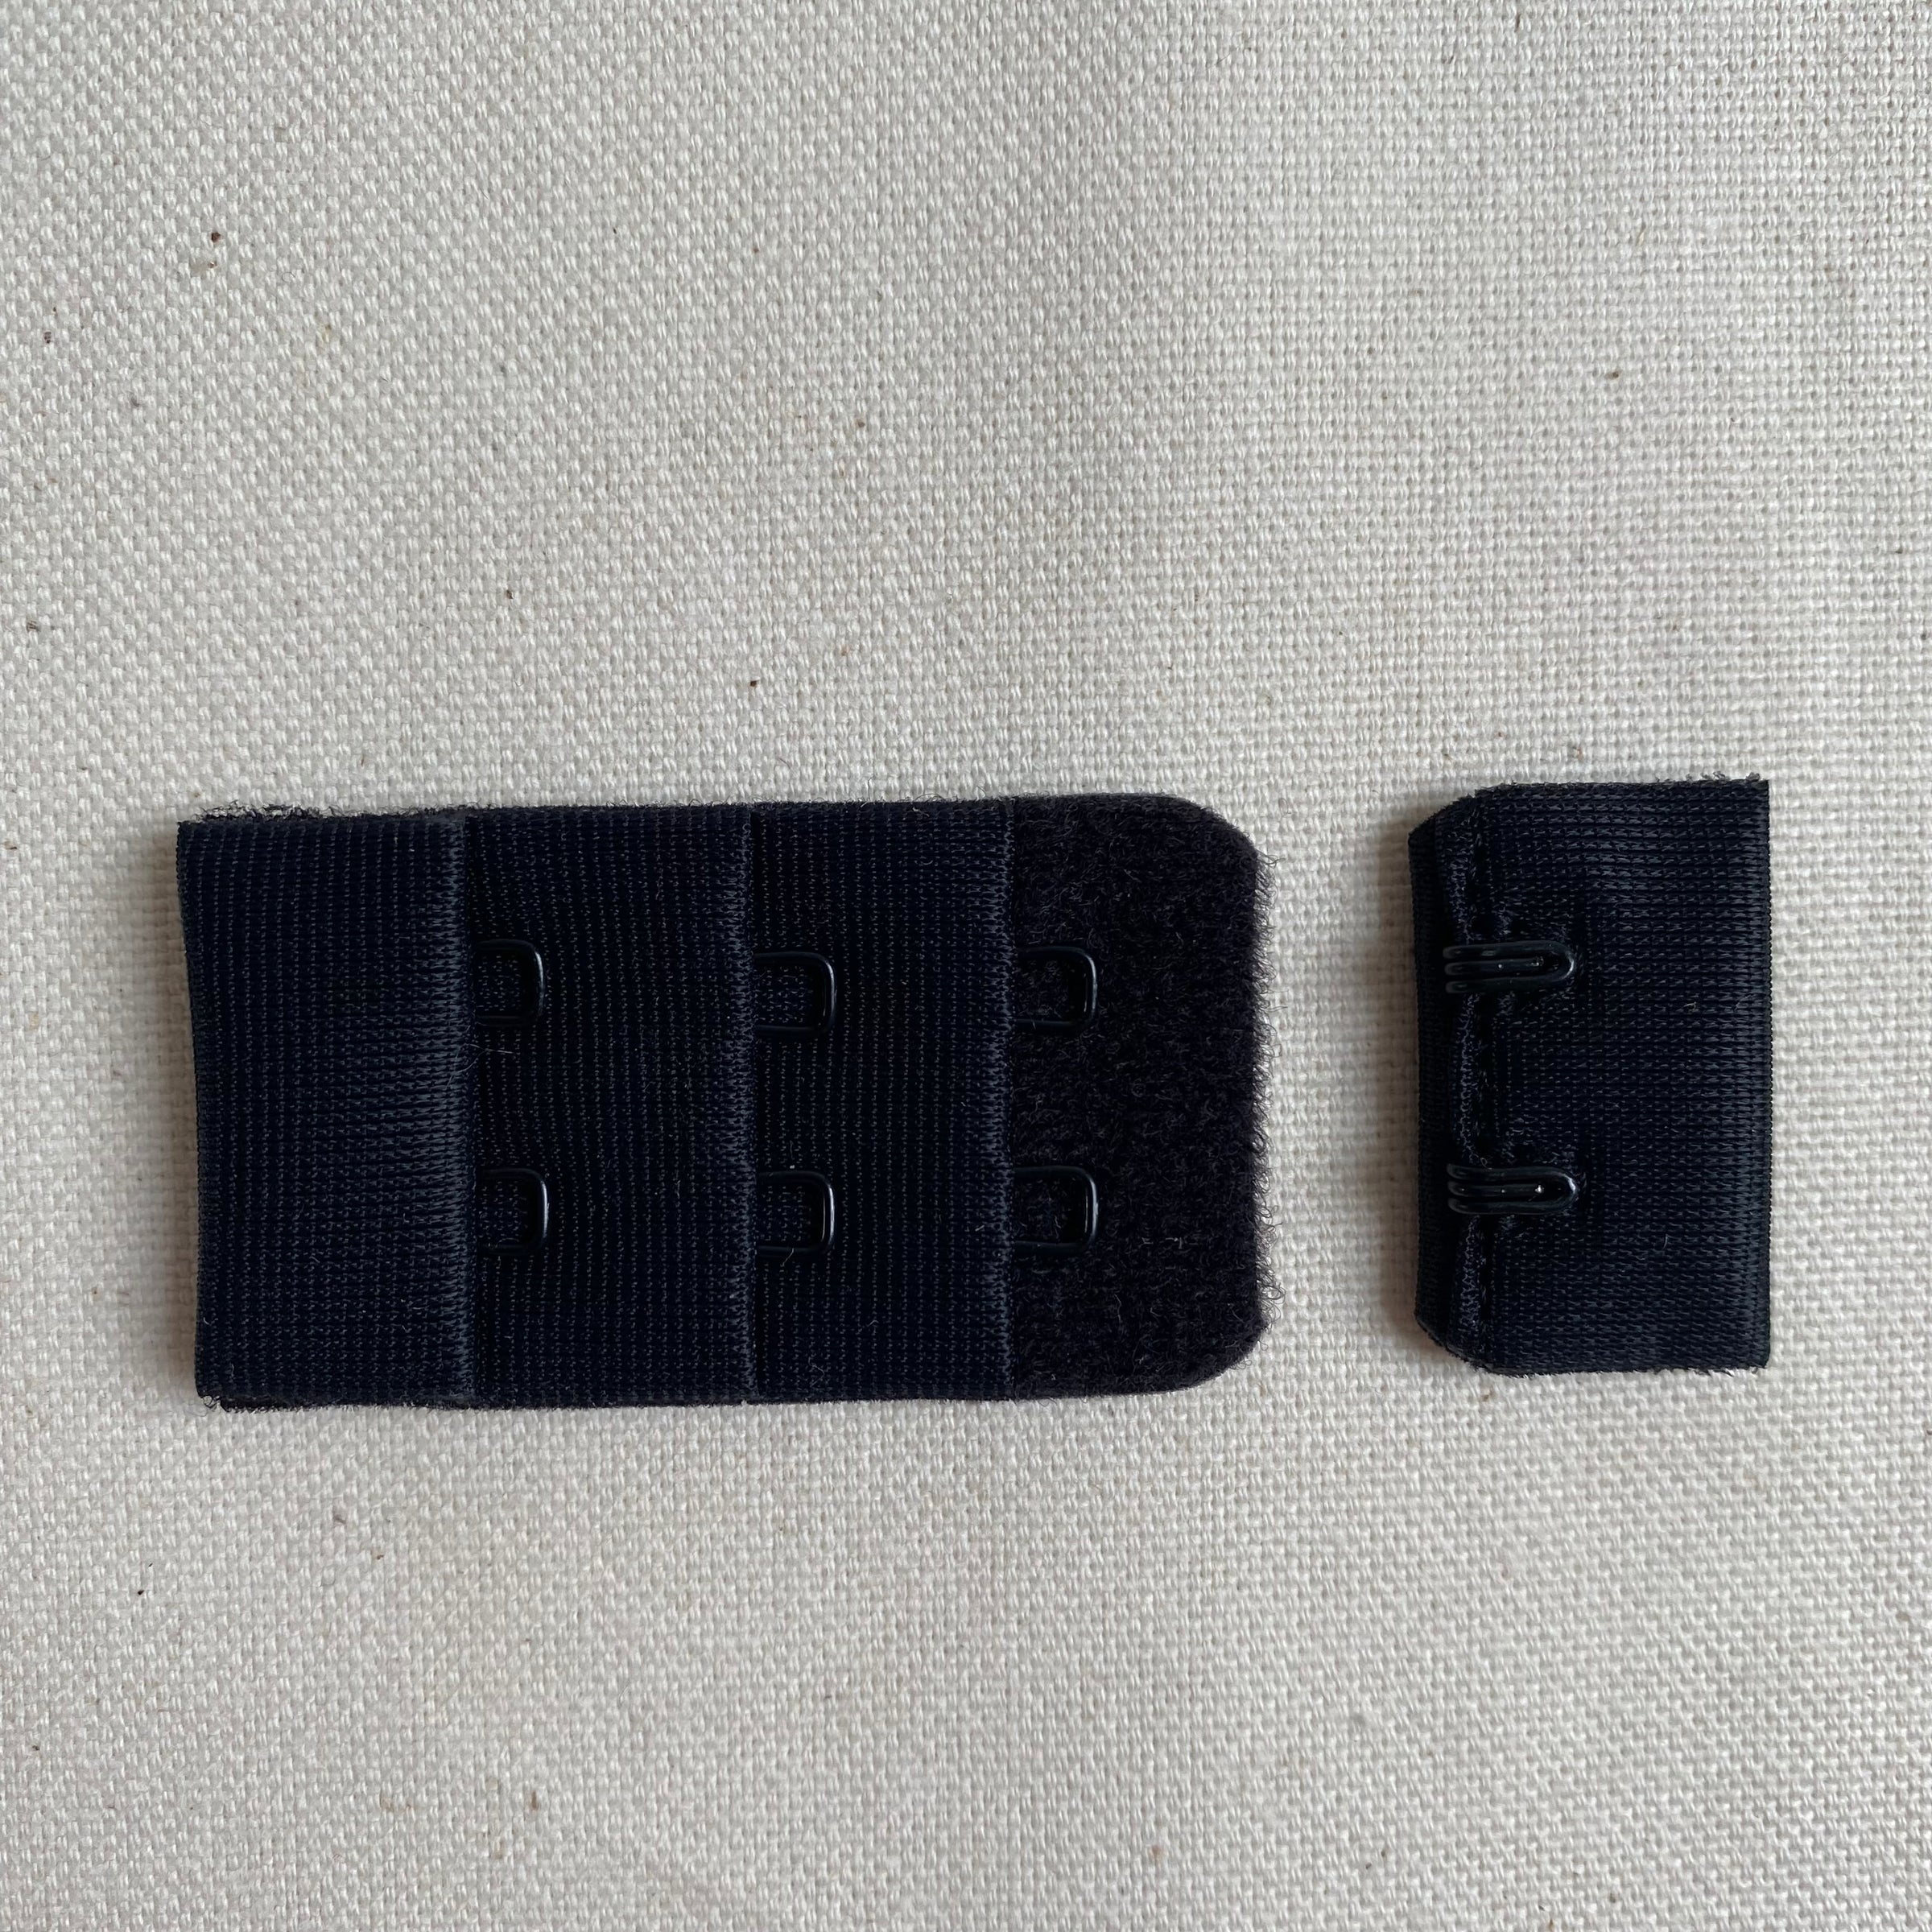 Black Bra Making Replacement Hook and Eye Tape Closures 2 Rows 1 1/2 Wide  Lingerie Design, DIY Bra Supplies HE132 